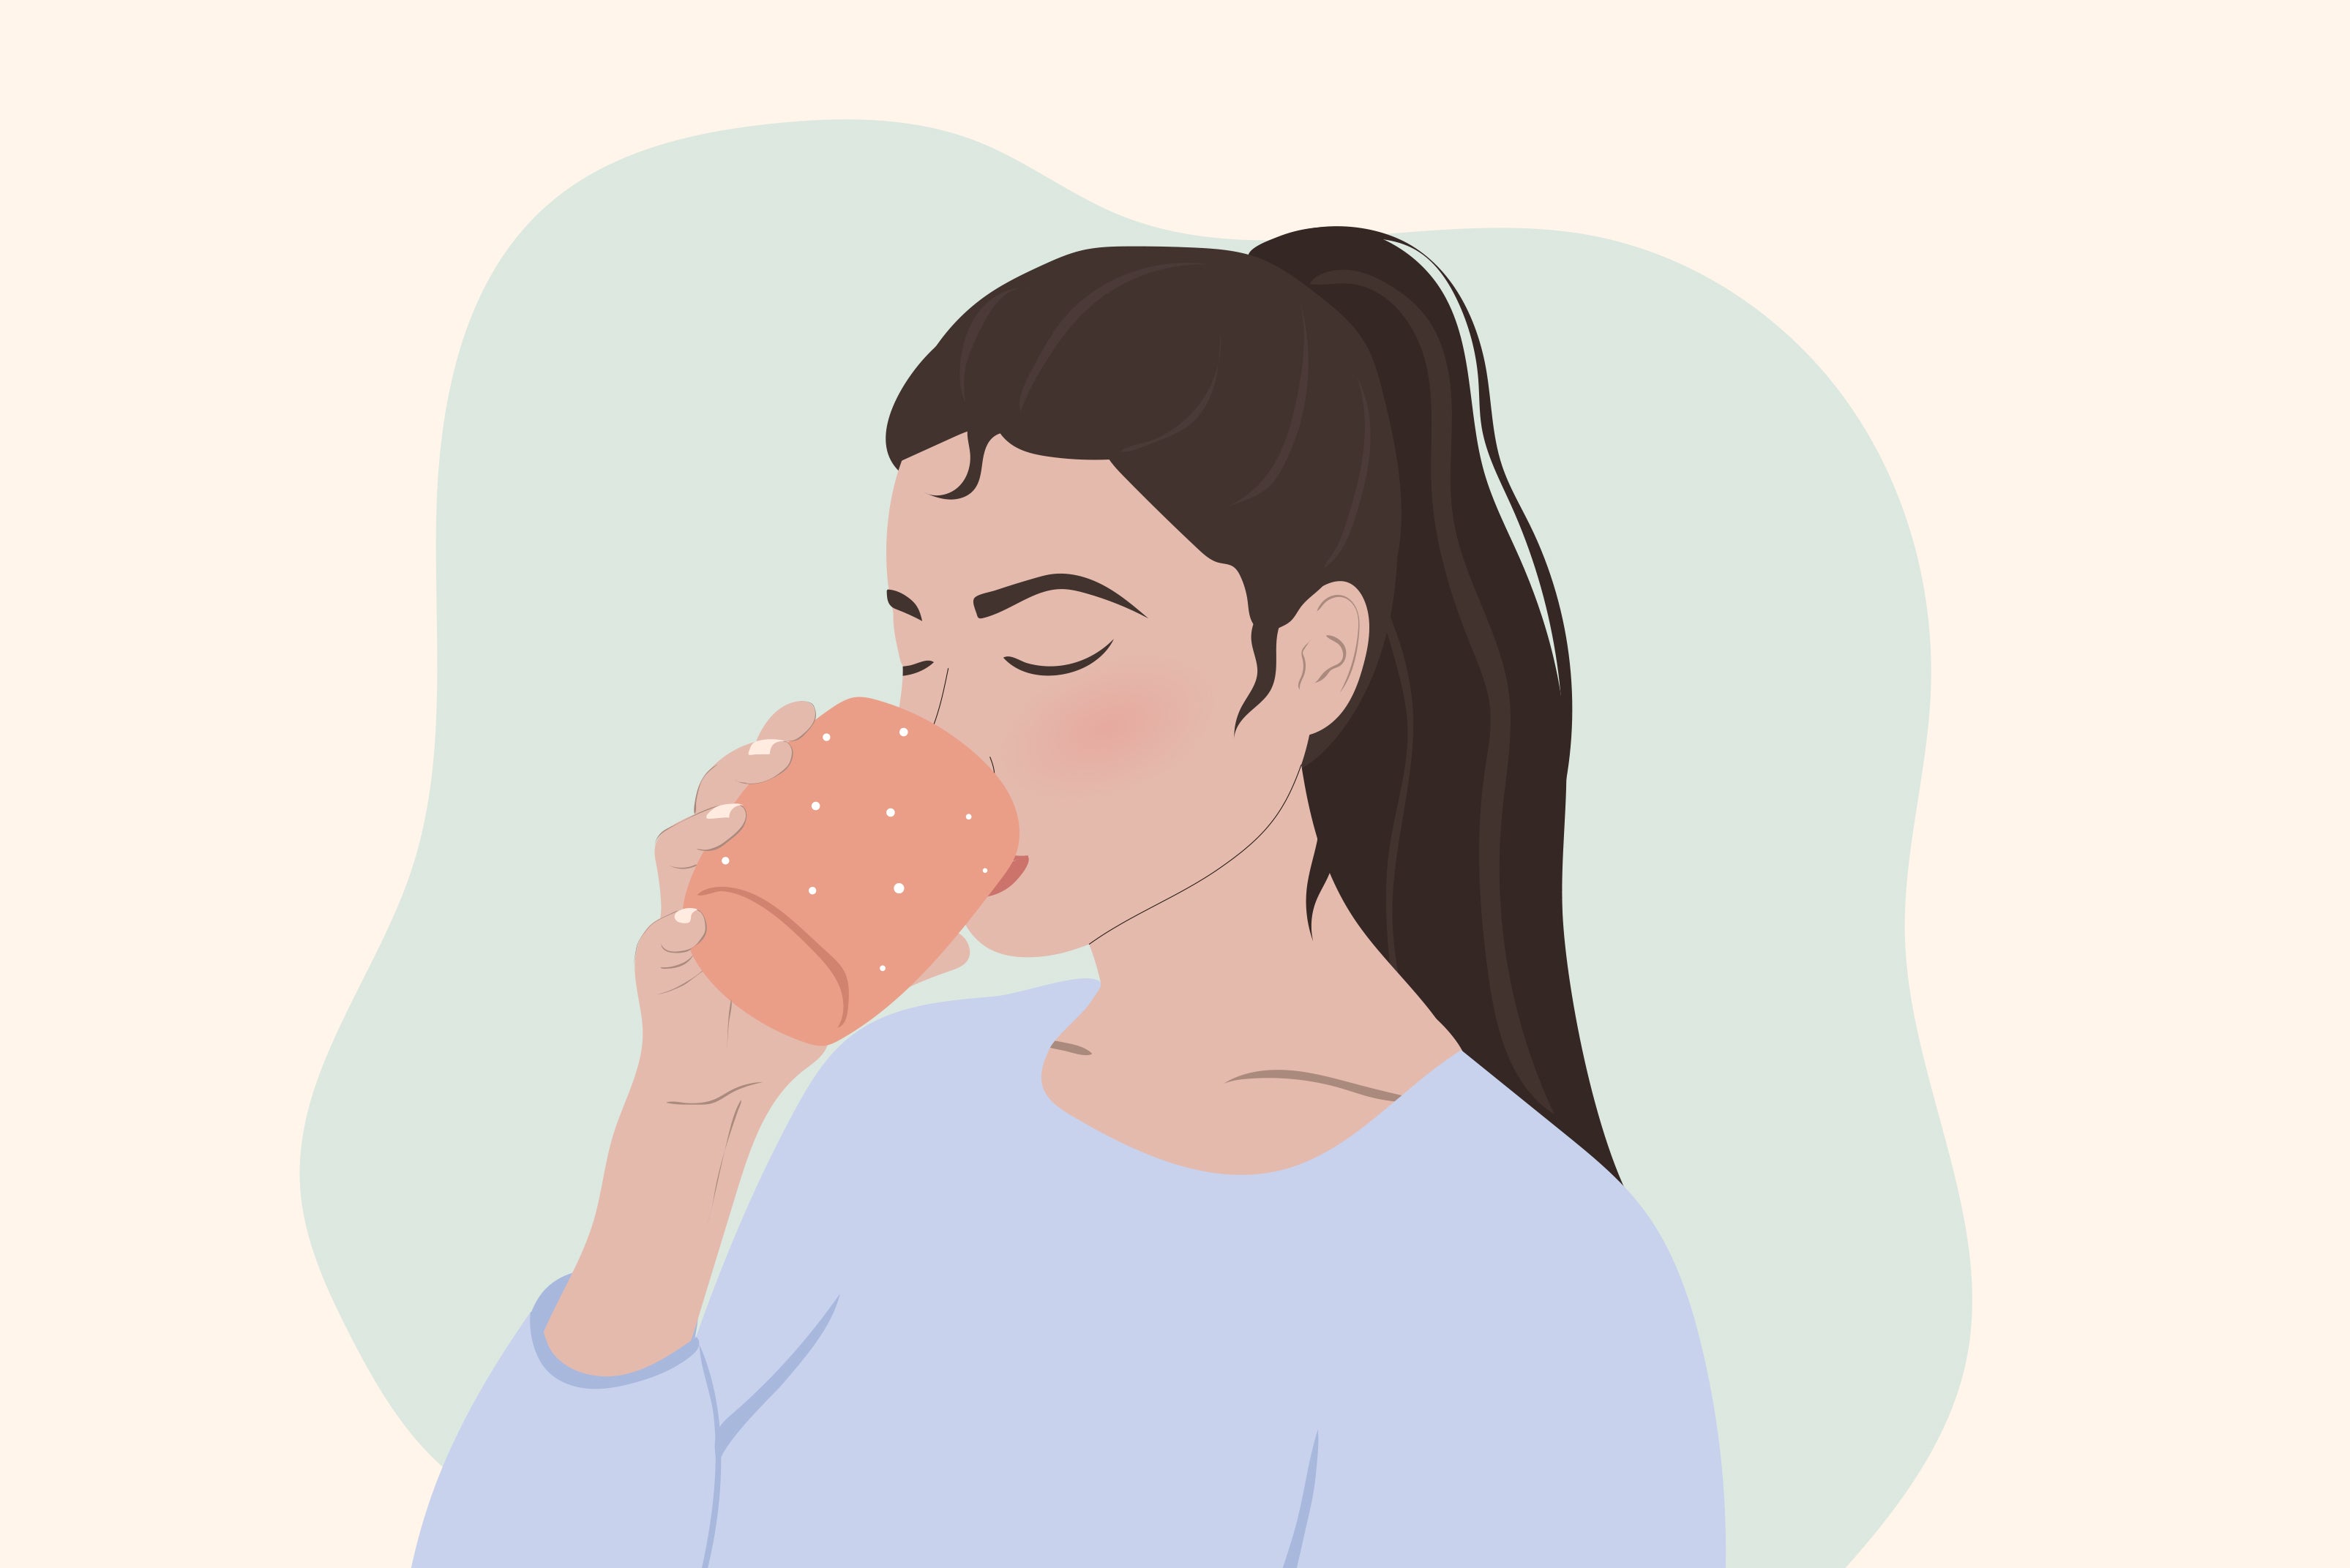 Drawing of a woman drinking from a peach colored cup to help relieve period cramps.